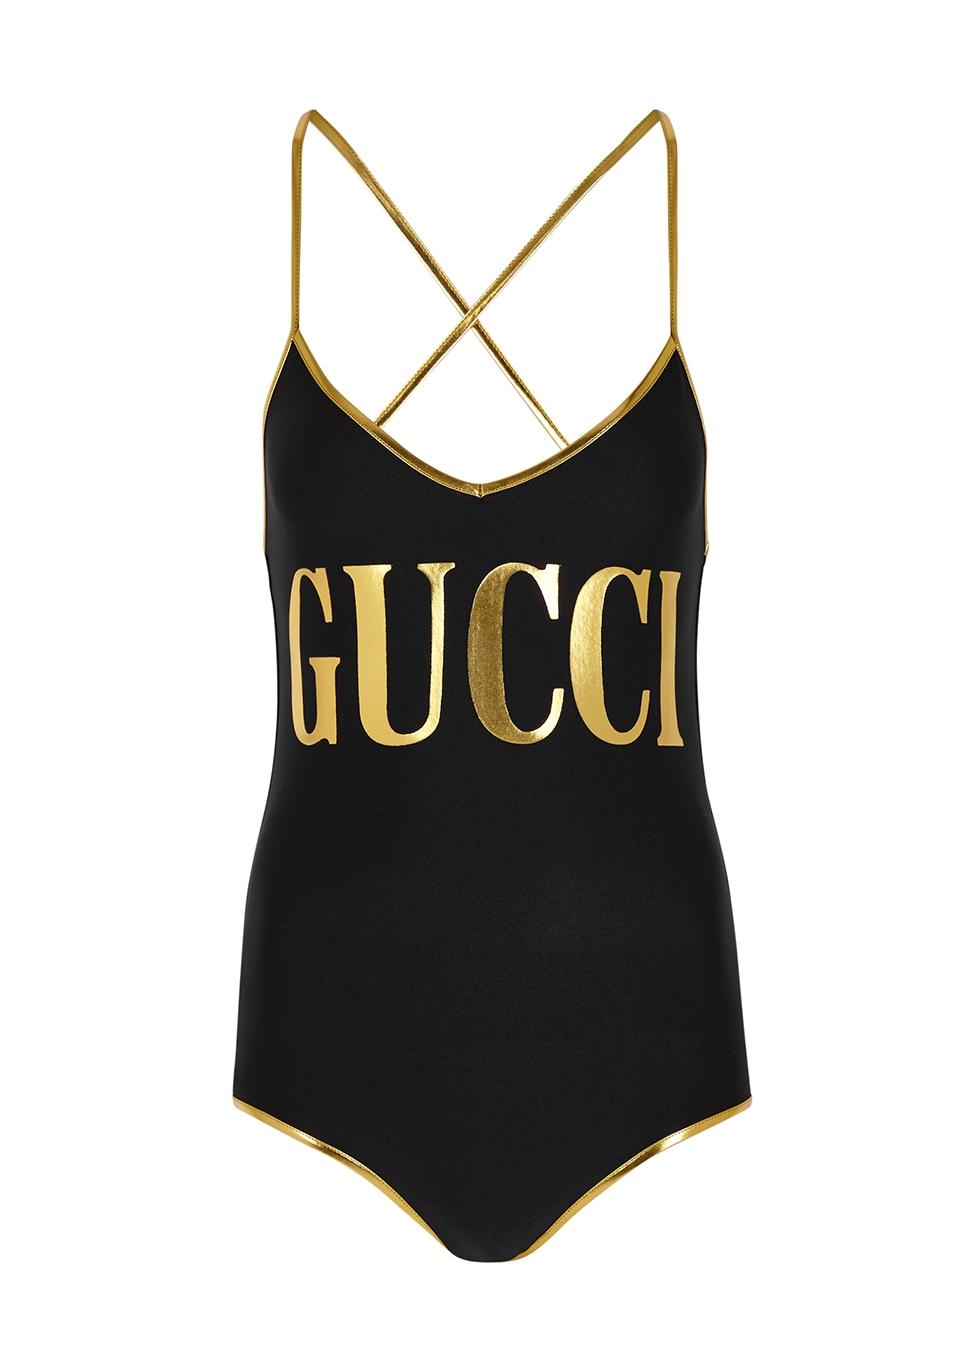 Top 95+ imagen gucci swimsuits - Abzlocal.mx